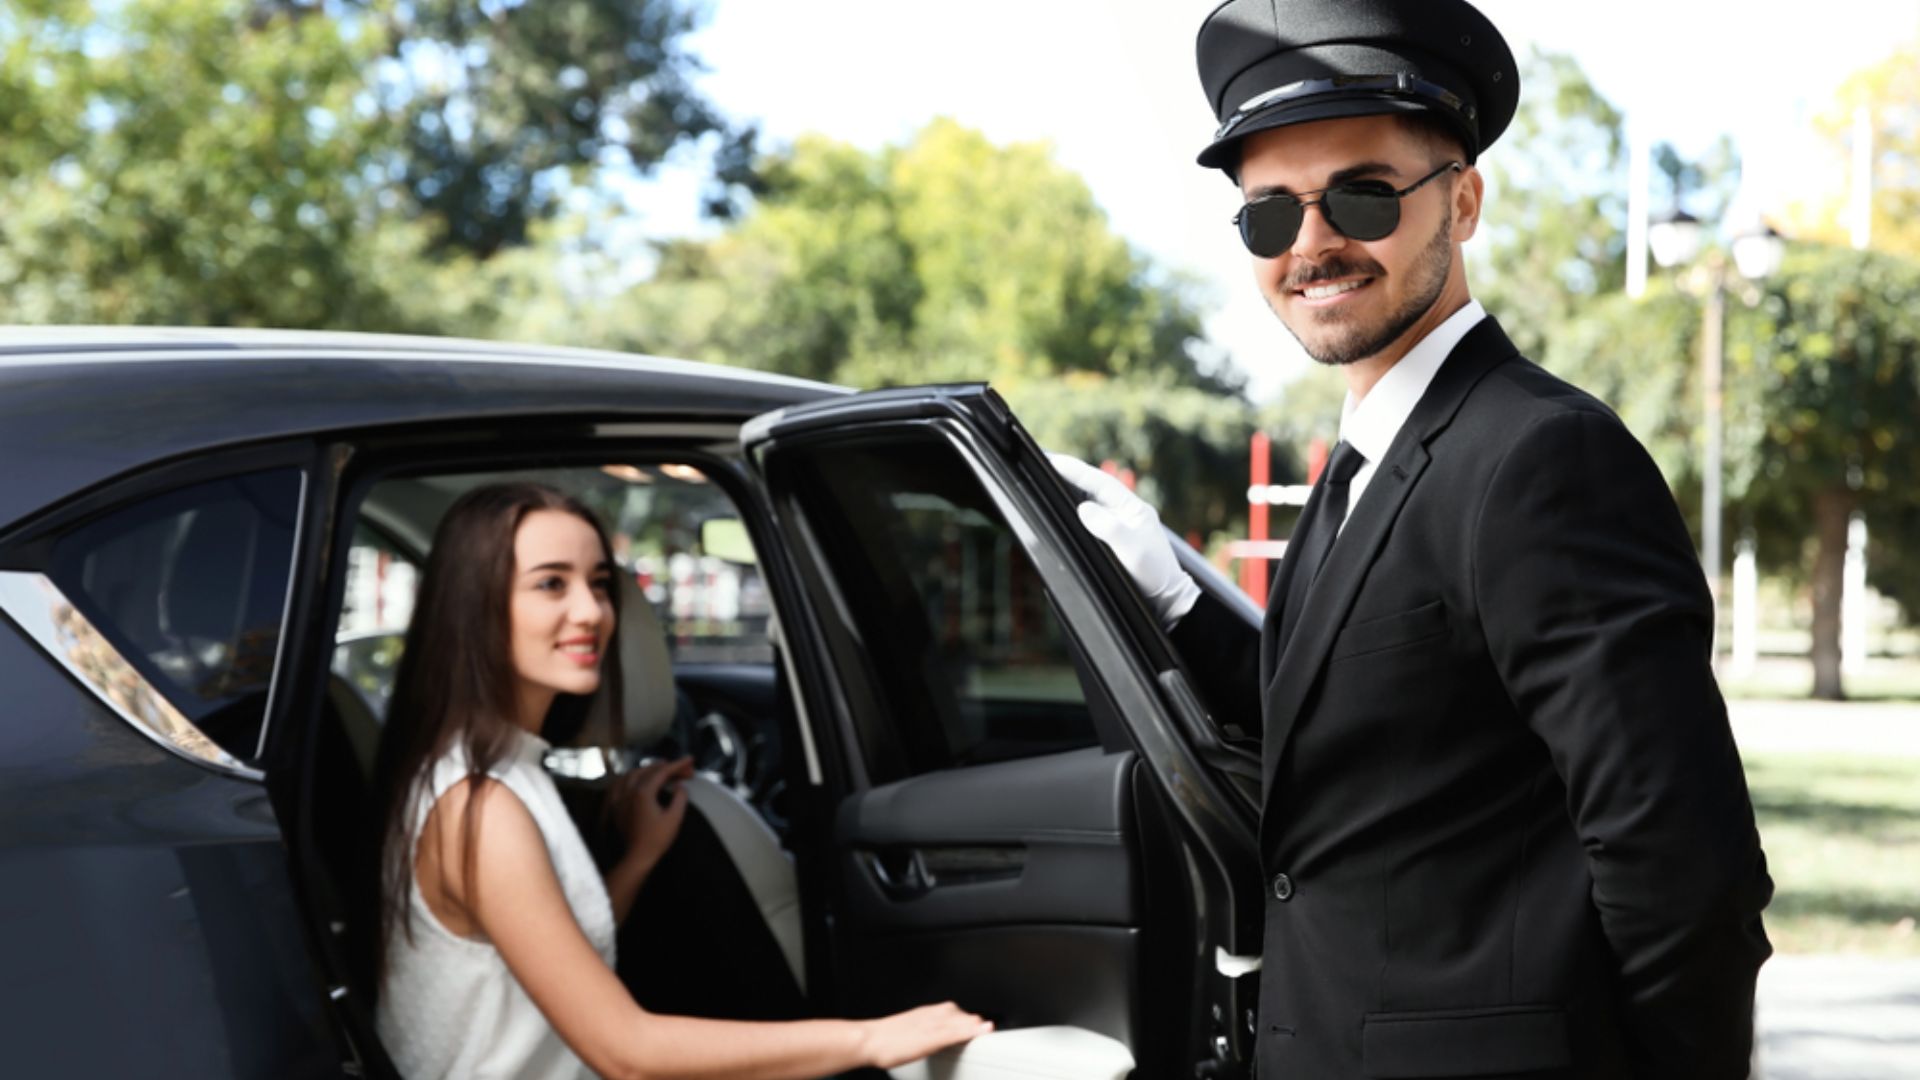 local knowledge of your limo driver